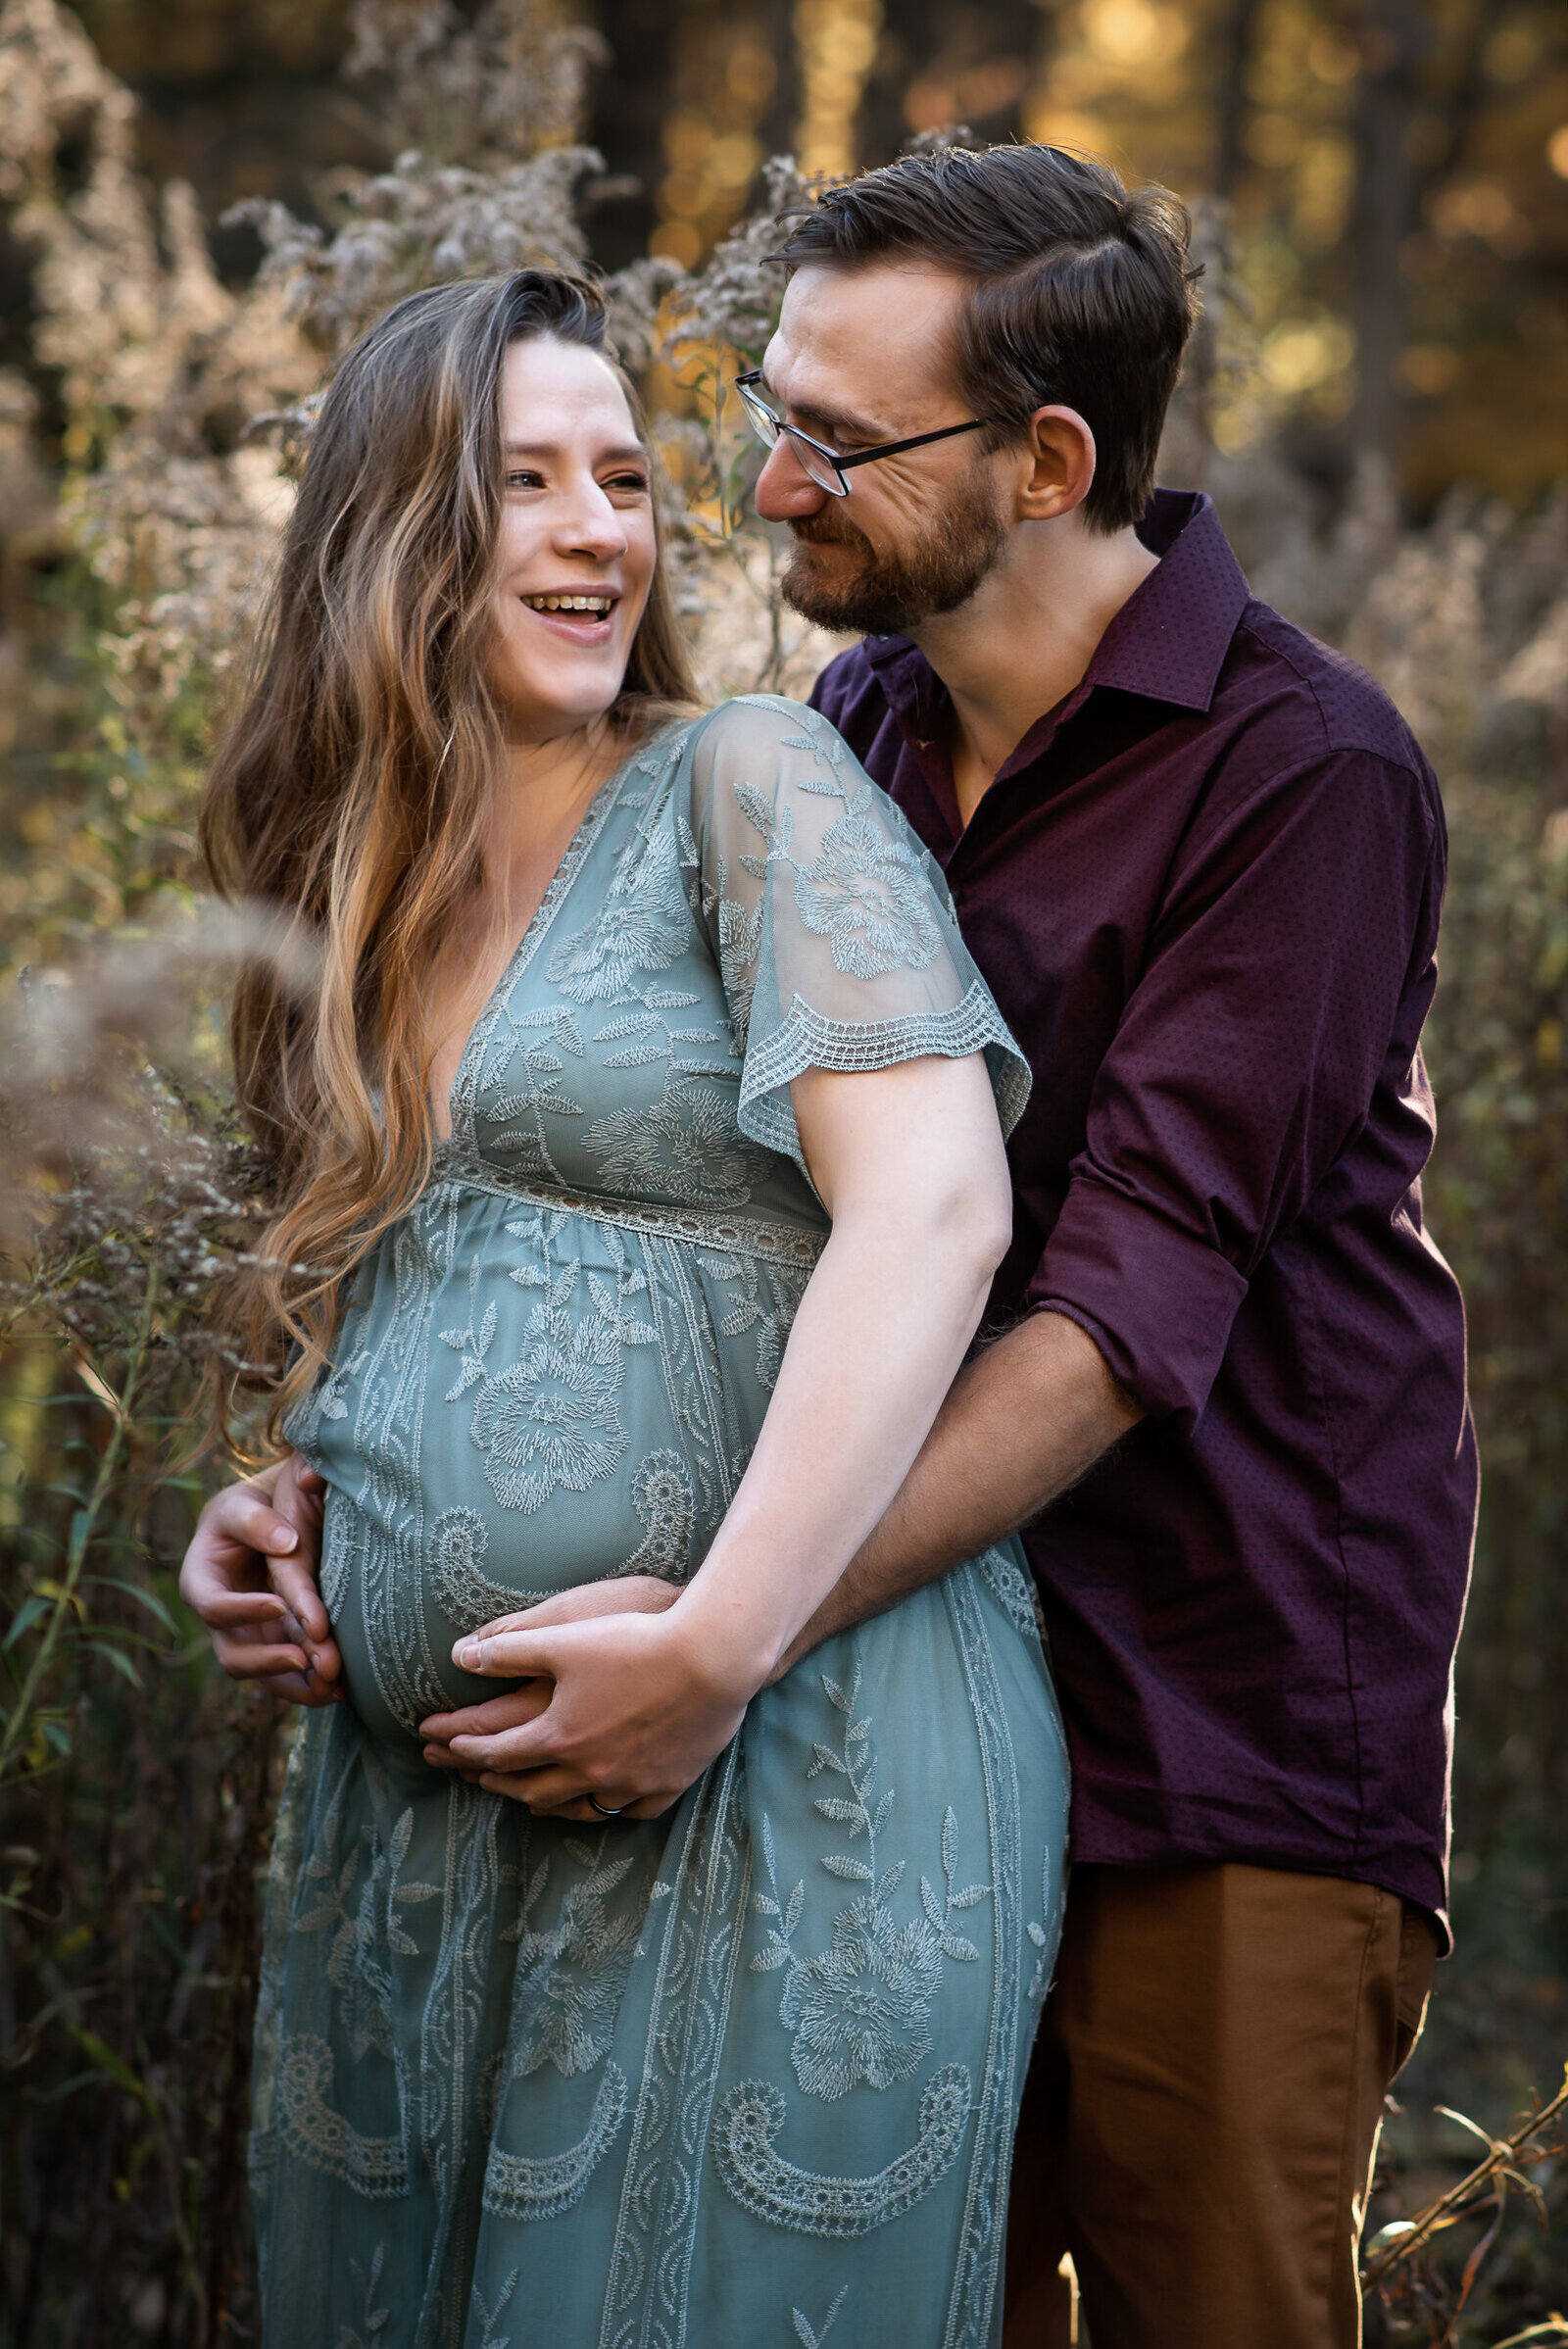 Man holds his wife's pregnant belly from behind while they exchange smiles